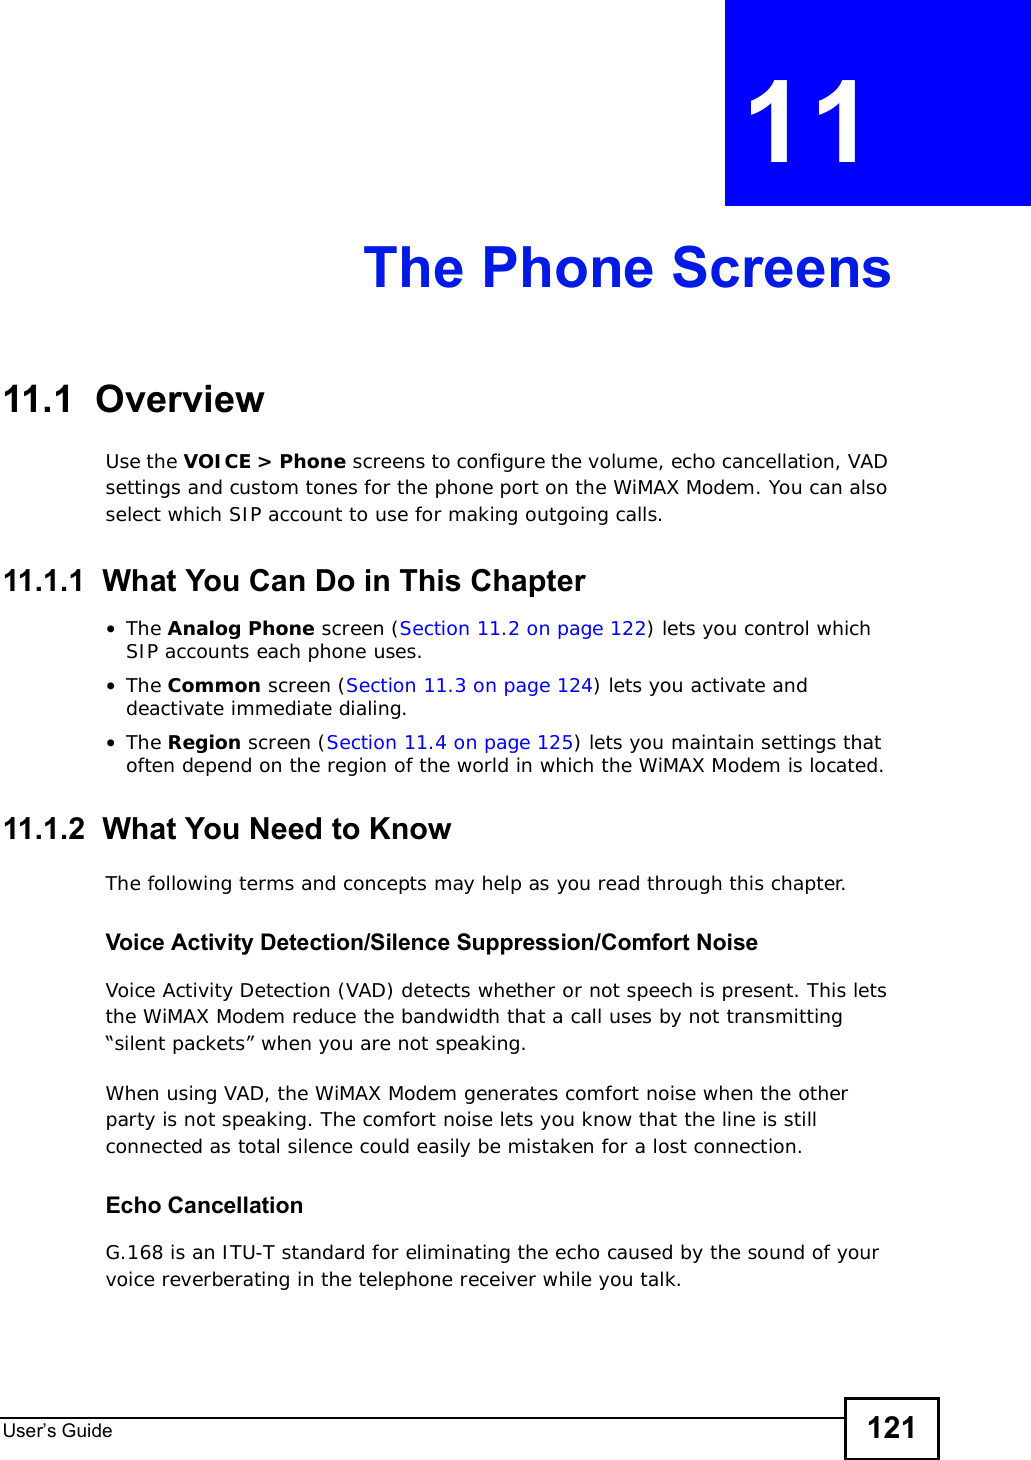 User s Guide 121CHAPTER 11 The Phone Screens11.1  OverviewUse the VOICE &gt; Phone screens to configure the volume, echo cancellation, VAD settings and custom tones for the phone port on the WiMAX Modem. You can also select which SIP account to use for making outgoing calls.11.1.1  What You Can Do in This Chapter•The Analog Phone screen (Section 11.2 on page 122) lets you control which SIP accounts each phone uses.•The Common screen (Section 11.3 on page 124) lets you activate and deactivate immediate dialing.•The Region screen (Section 11.4 on page 125) lets you maintain settings that often depend on the region of the world in which the WiMAX Modem is located.11.1.2  What You Need to KnowThe following terms and concepts may help as you read through this chapter.Voice Activity Detection/Silence Suppression/Comfort NoiseVoice Activity Detection (VAD) detects whether or not speech is present. This lets the WiMAX Modem reduce the bandwidth that a call uses by not transmitting “silent packets” when you are not speaking.When using VAD, the WiMAX Modem generates comfort noise when the other party is not speaking. The comfort noise lets you know that the line is still connected as total silence could easily be mistaken for a lost connection.Echo Cancellation G.168 is an ITU-T standard for eliminating the echo caused by the sound of your voice reverberating in the telephone receiver while you talk.